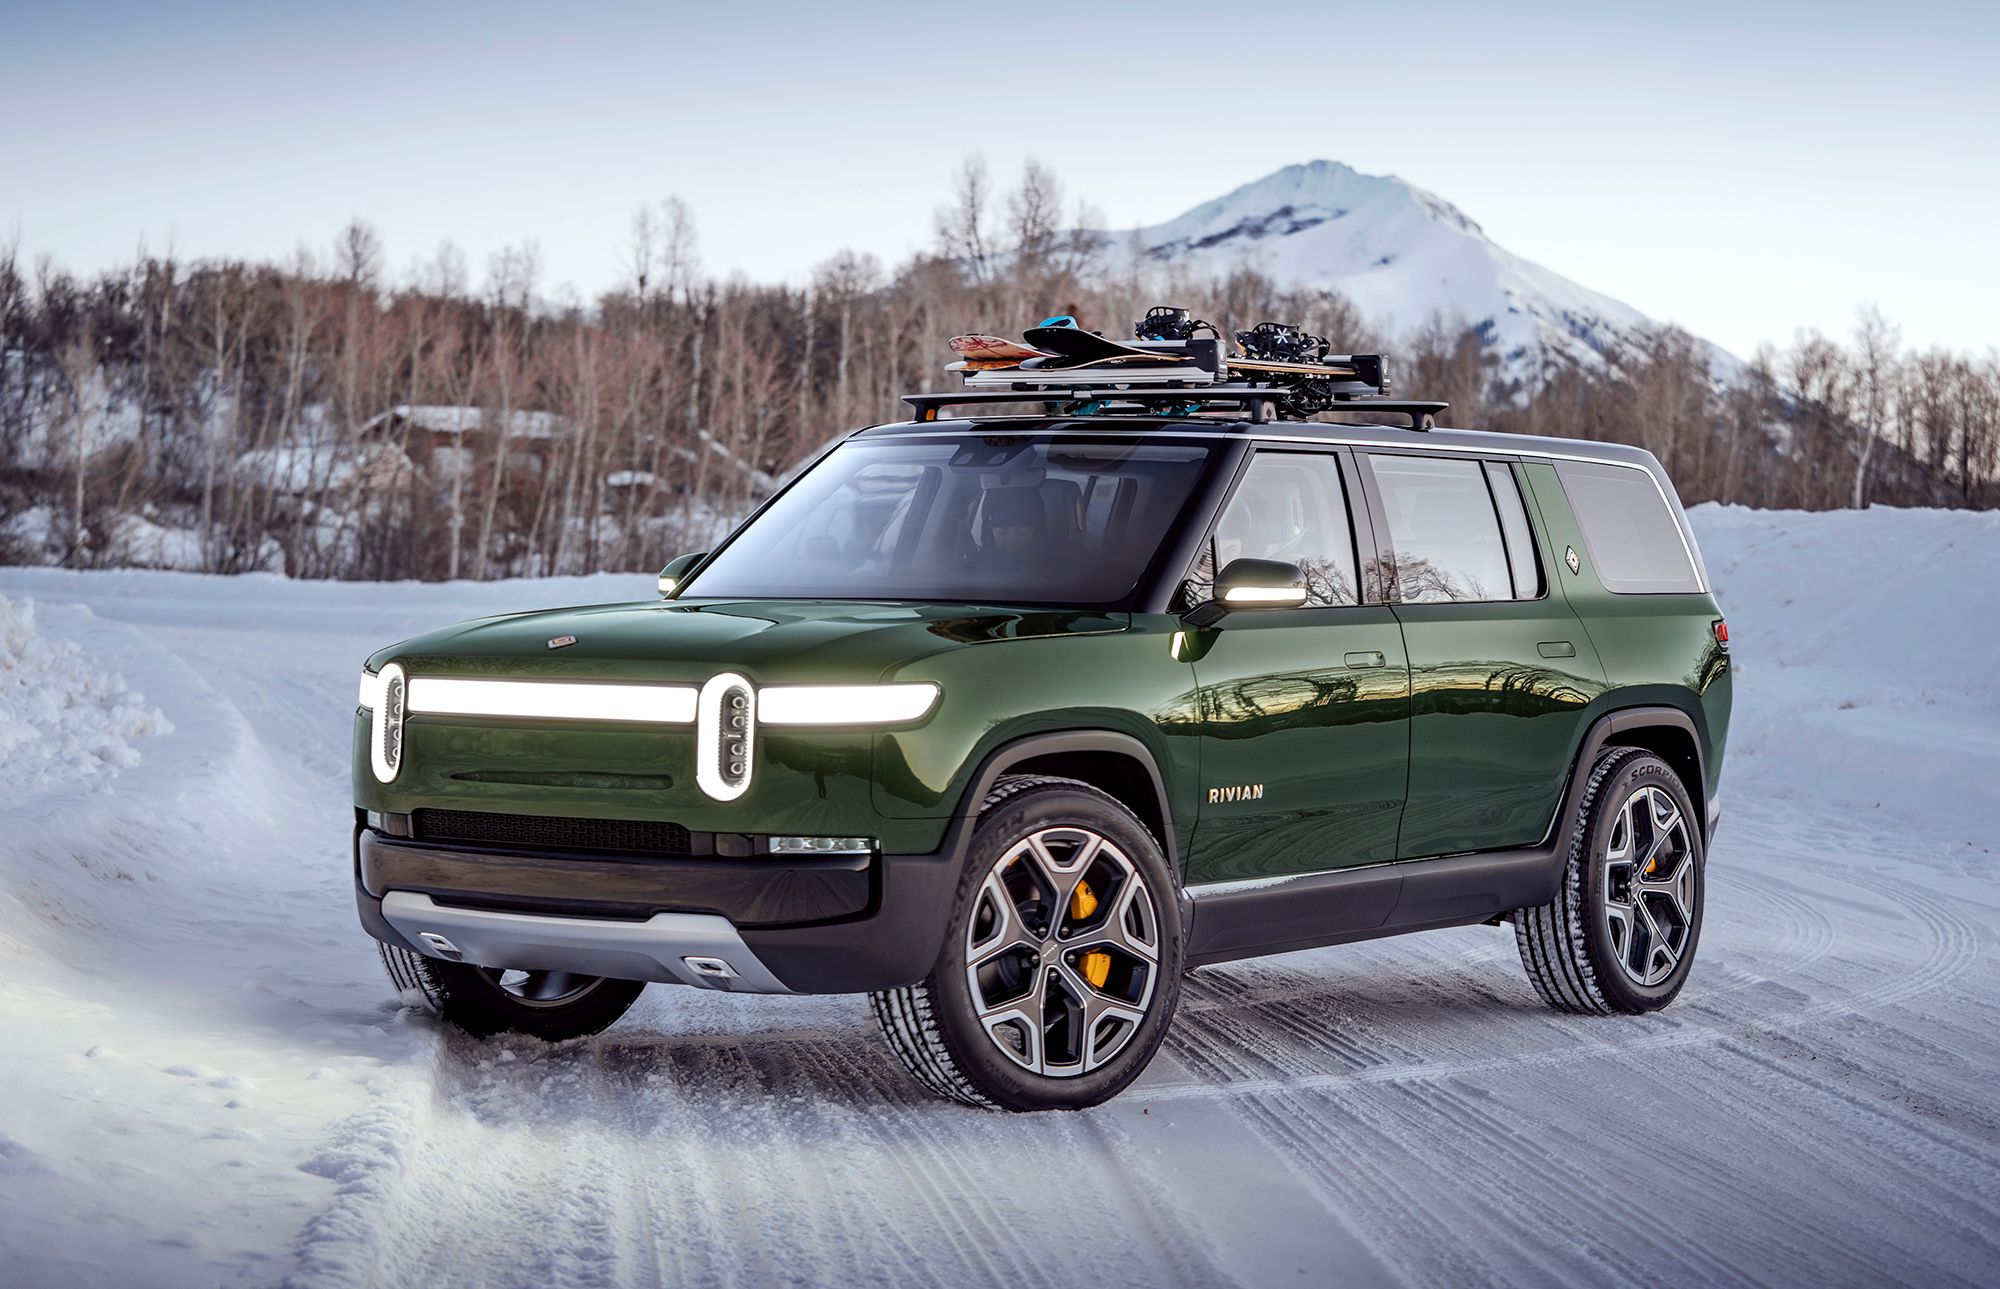 Rivian's growth changed this Midwestern town's fortunes | CNN Business